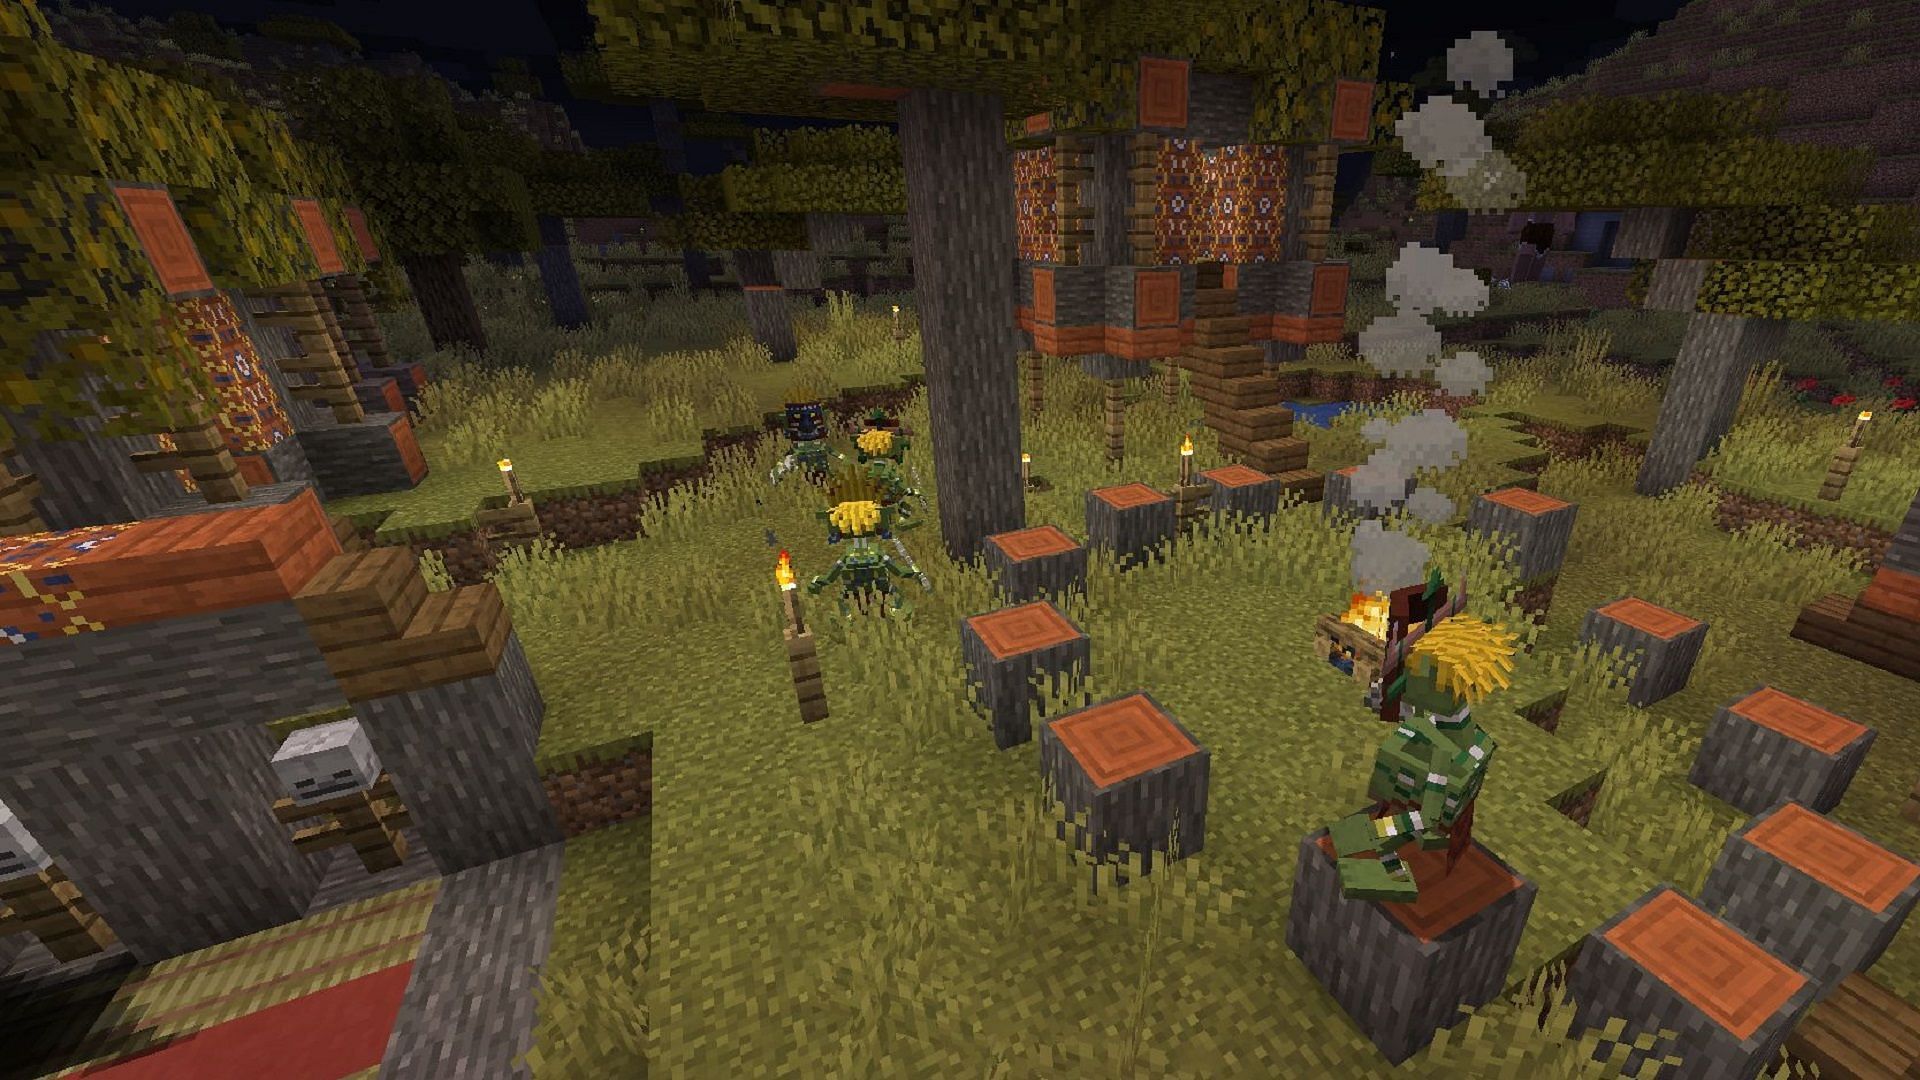 A dangerous forest in Minecraft